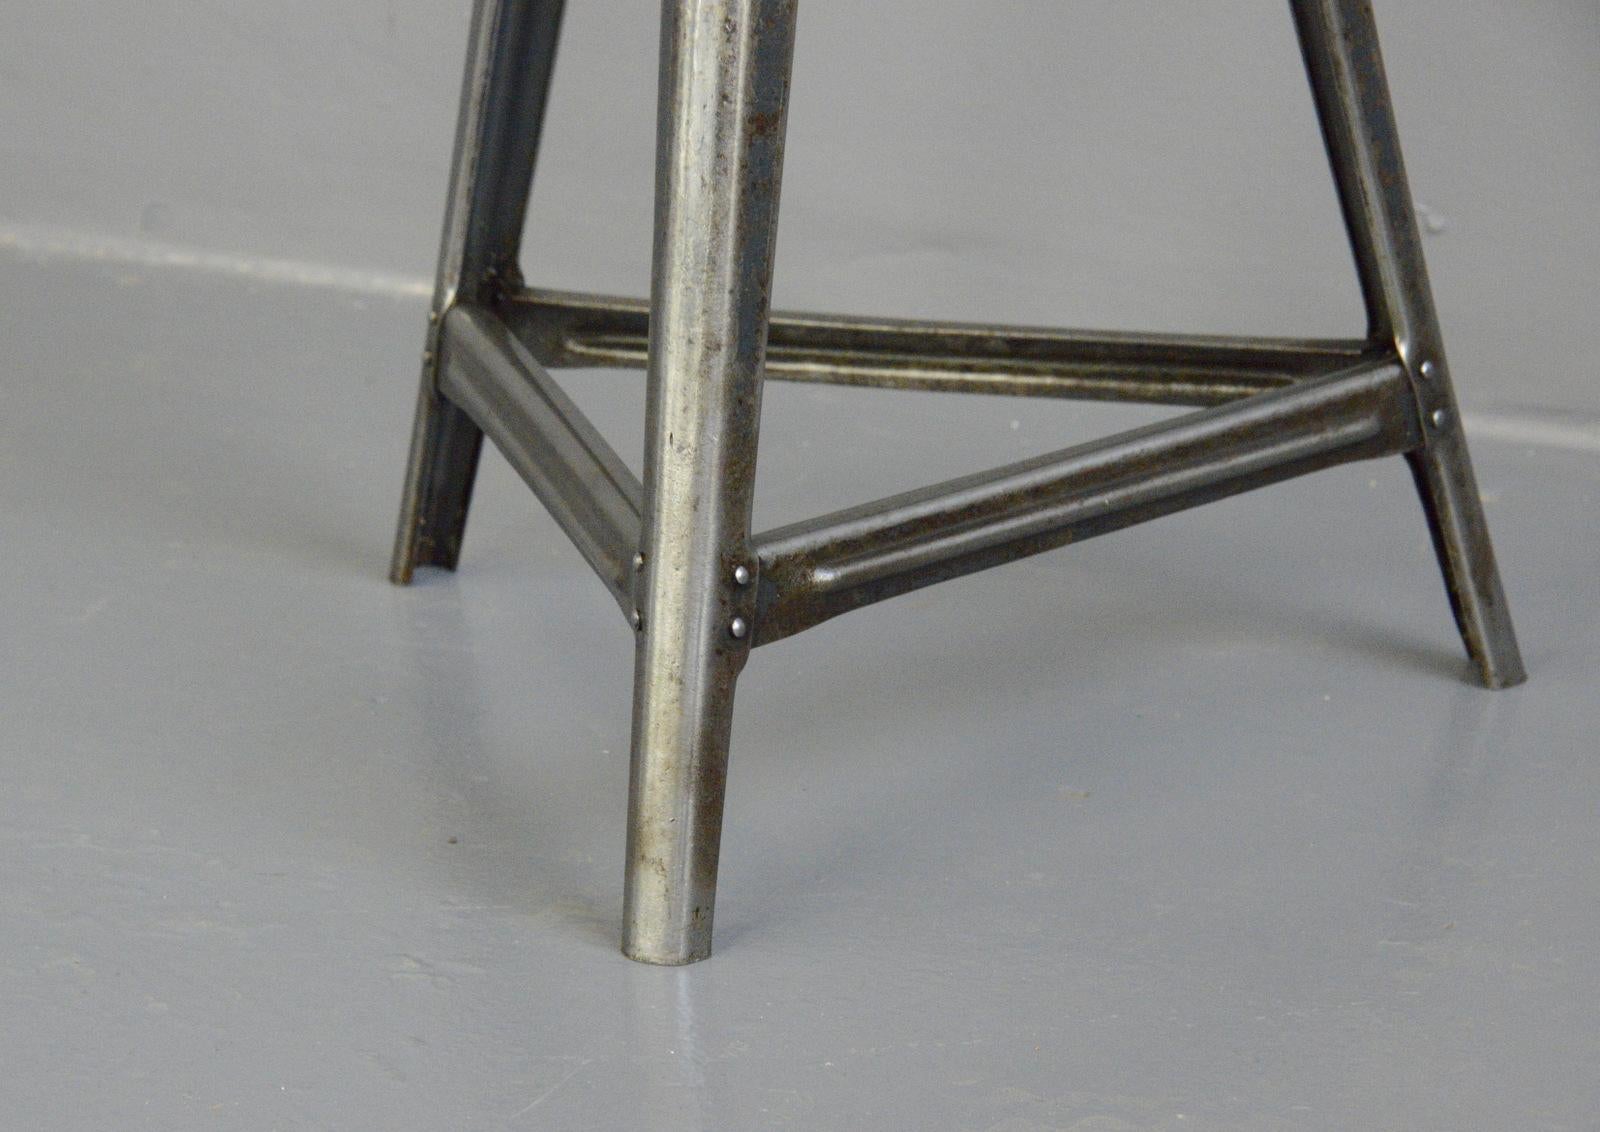 Industrial factory stool by Rowac, circa 1930s

- Branded under the seat
- By Robert Wagner, Chemnitz
- German, 1930s
- Measures: 60cm tall x 35cm wide

Rowac

Robert Wagner’s founded his company in 1888 in Chemnitz, better known as Rowac.